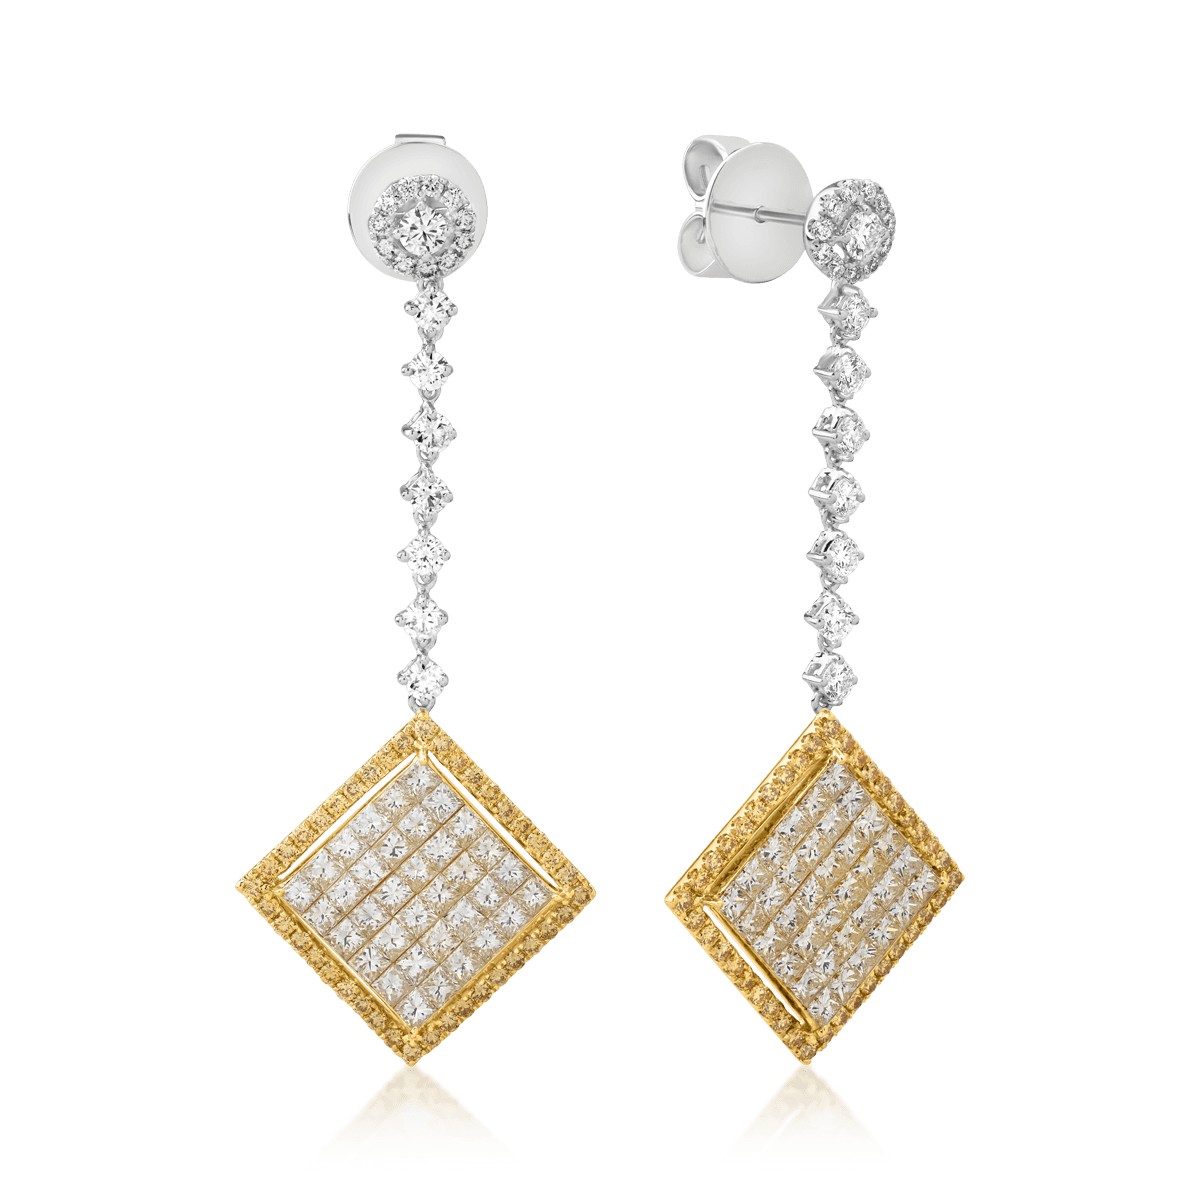 18k white gold earrings with white diamonds of 3.75CT and colorful diamonds of 0.63ct